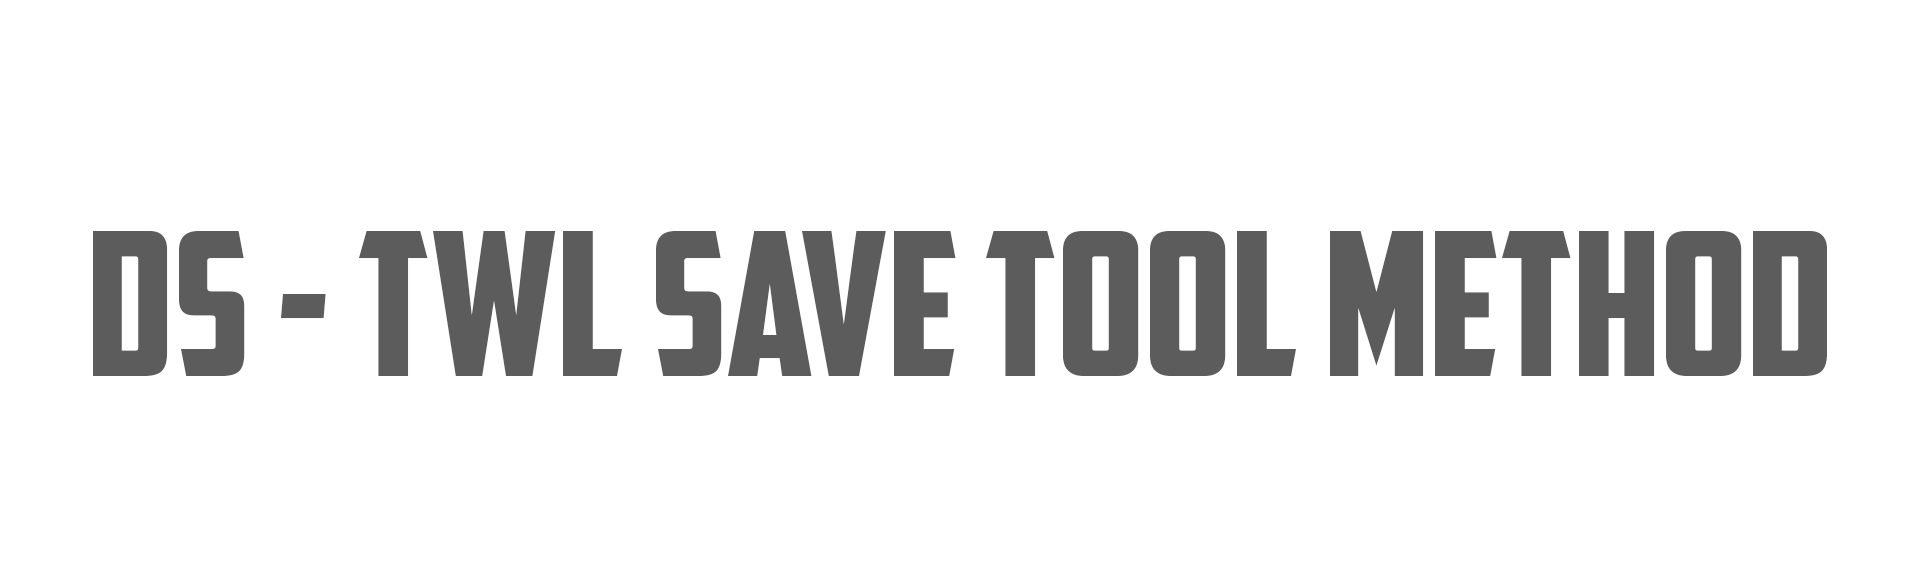 More information about "Using TWL Save Tool"